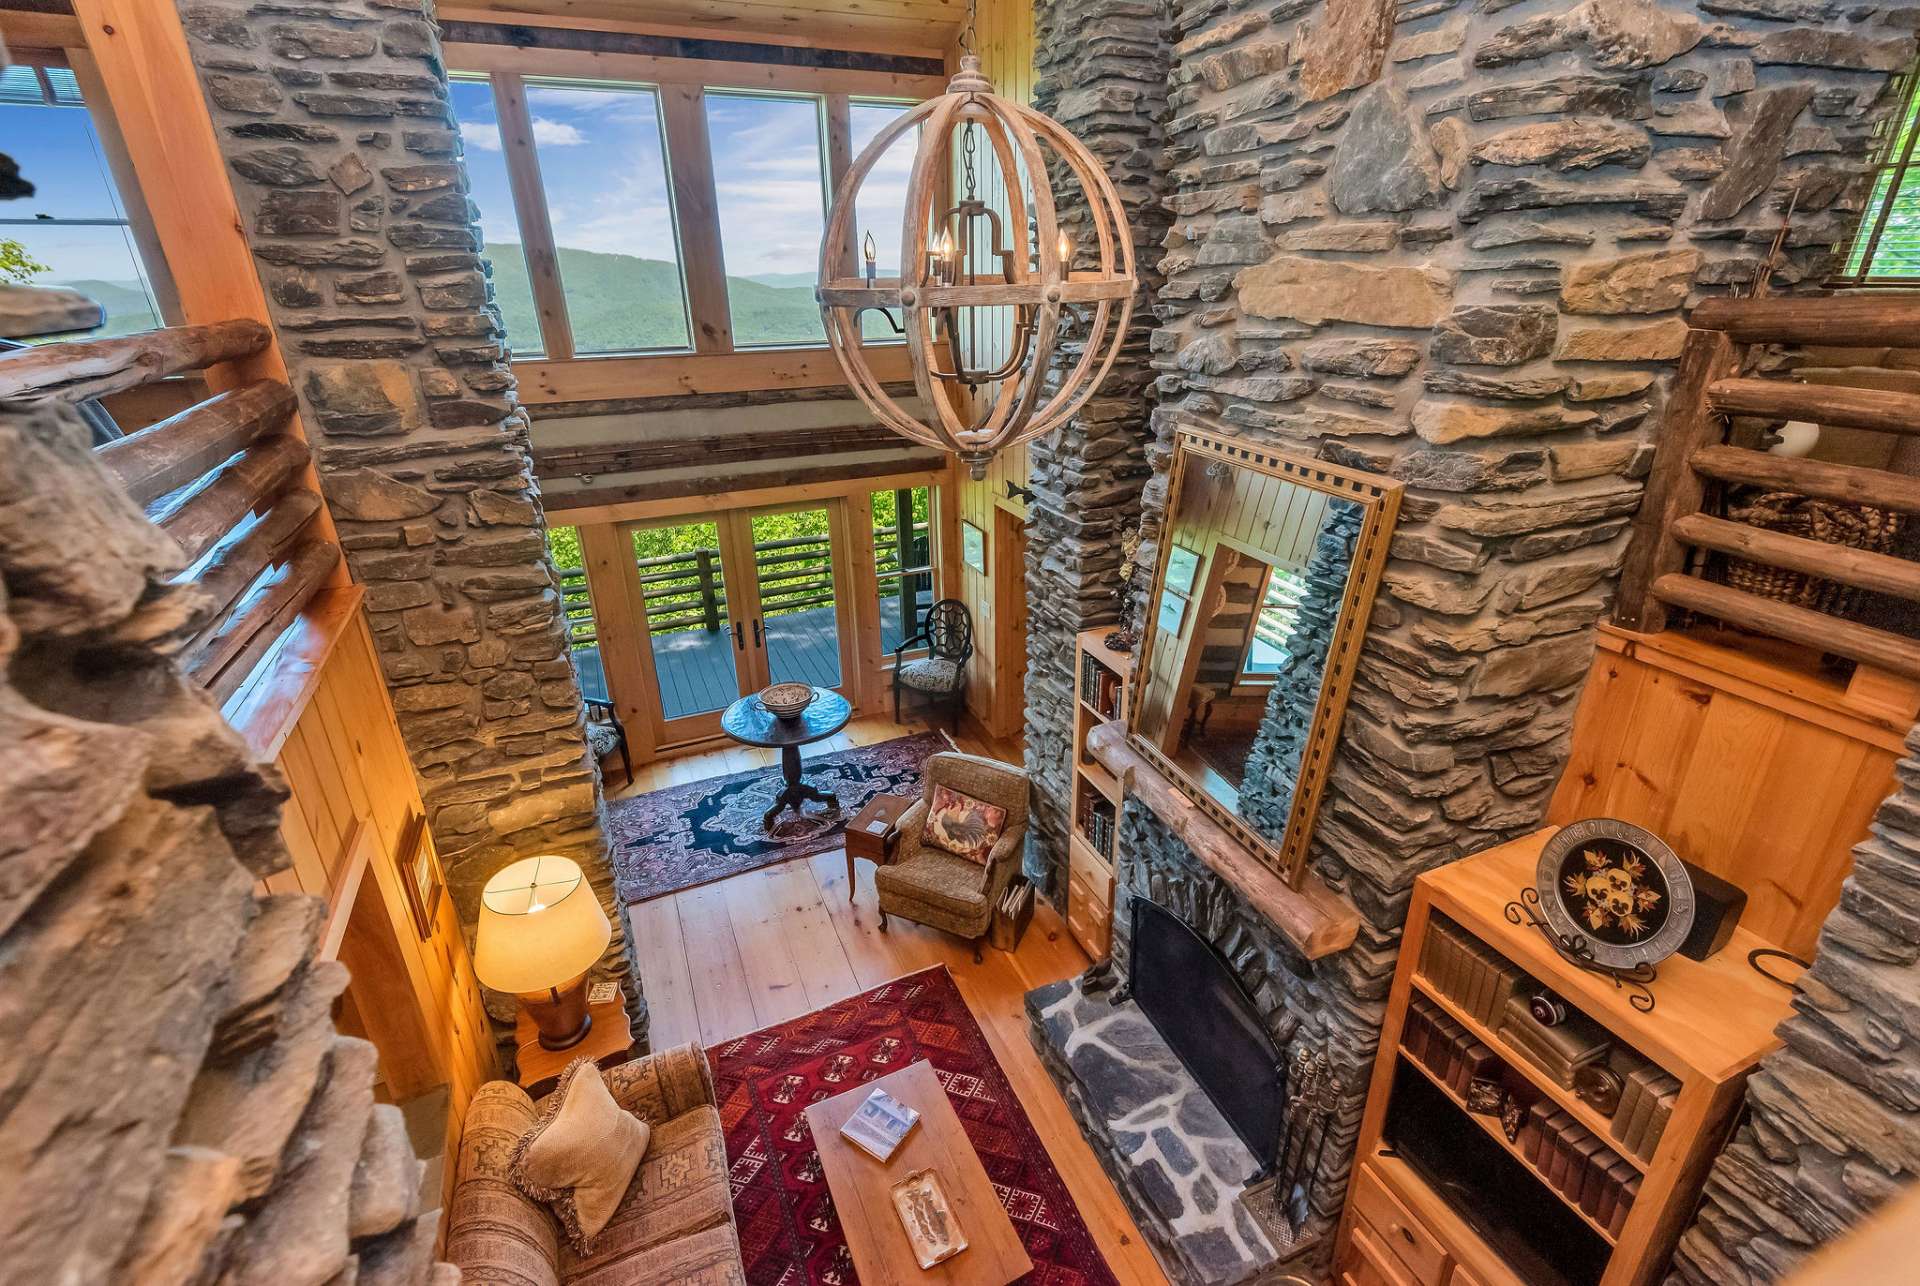 The craftsmanship and stonework in this distinctive Stonebridge cabin are a work of art.